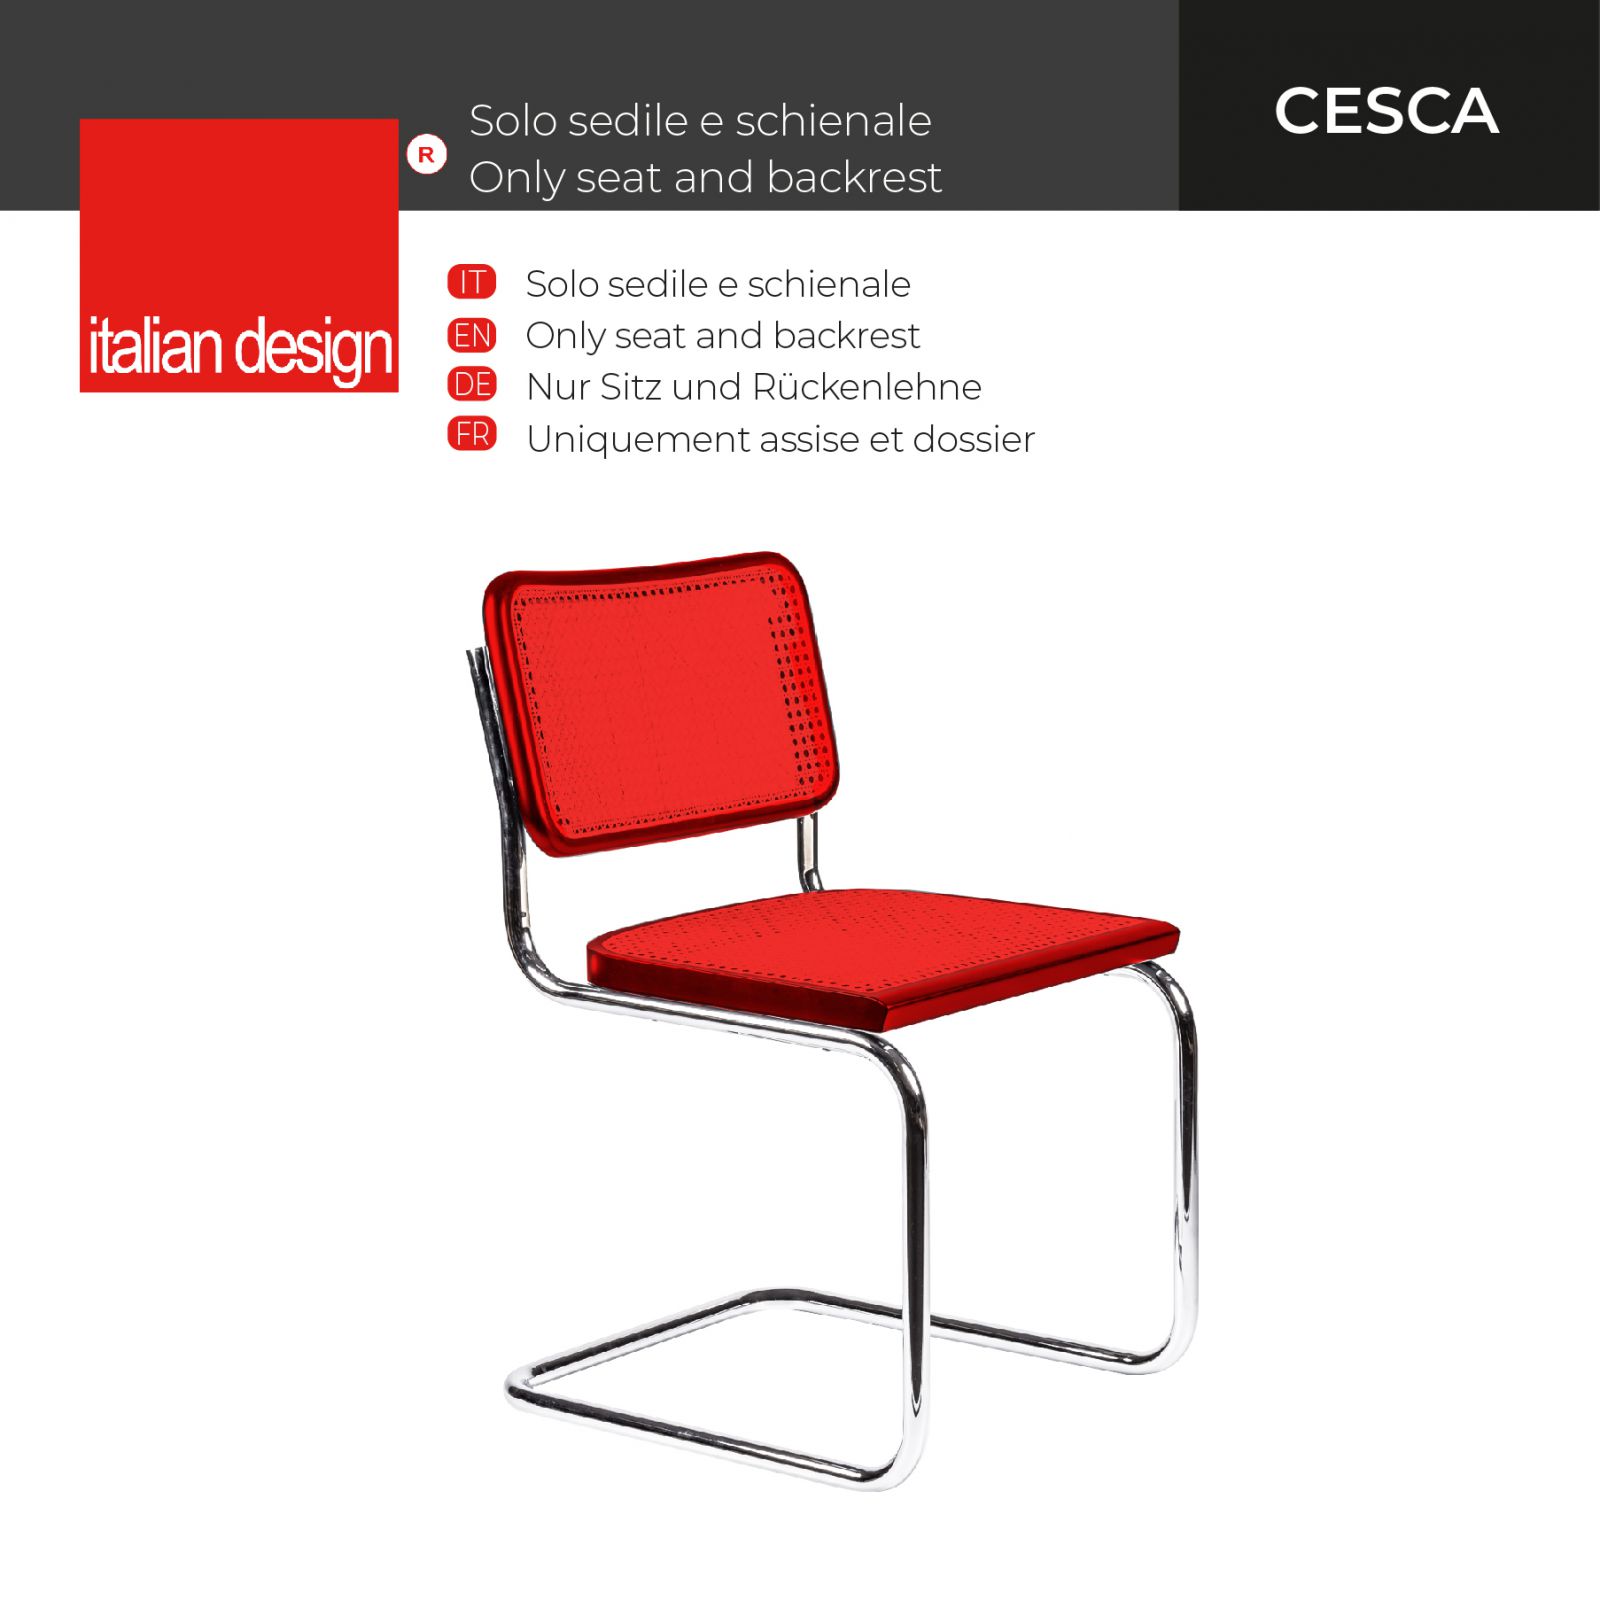 Breuer Chair Company Cesca Chair Replacement Upholstered Seat